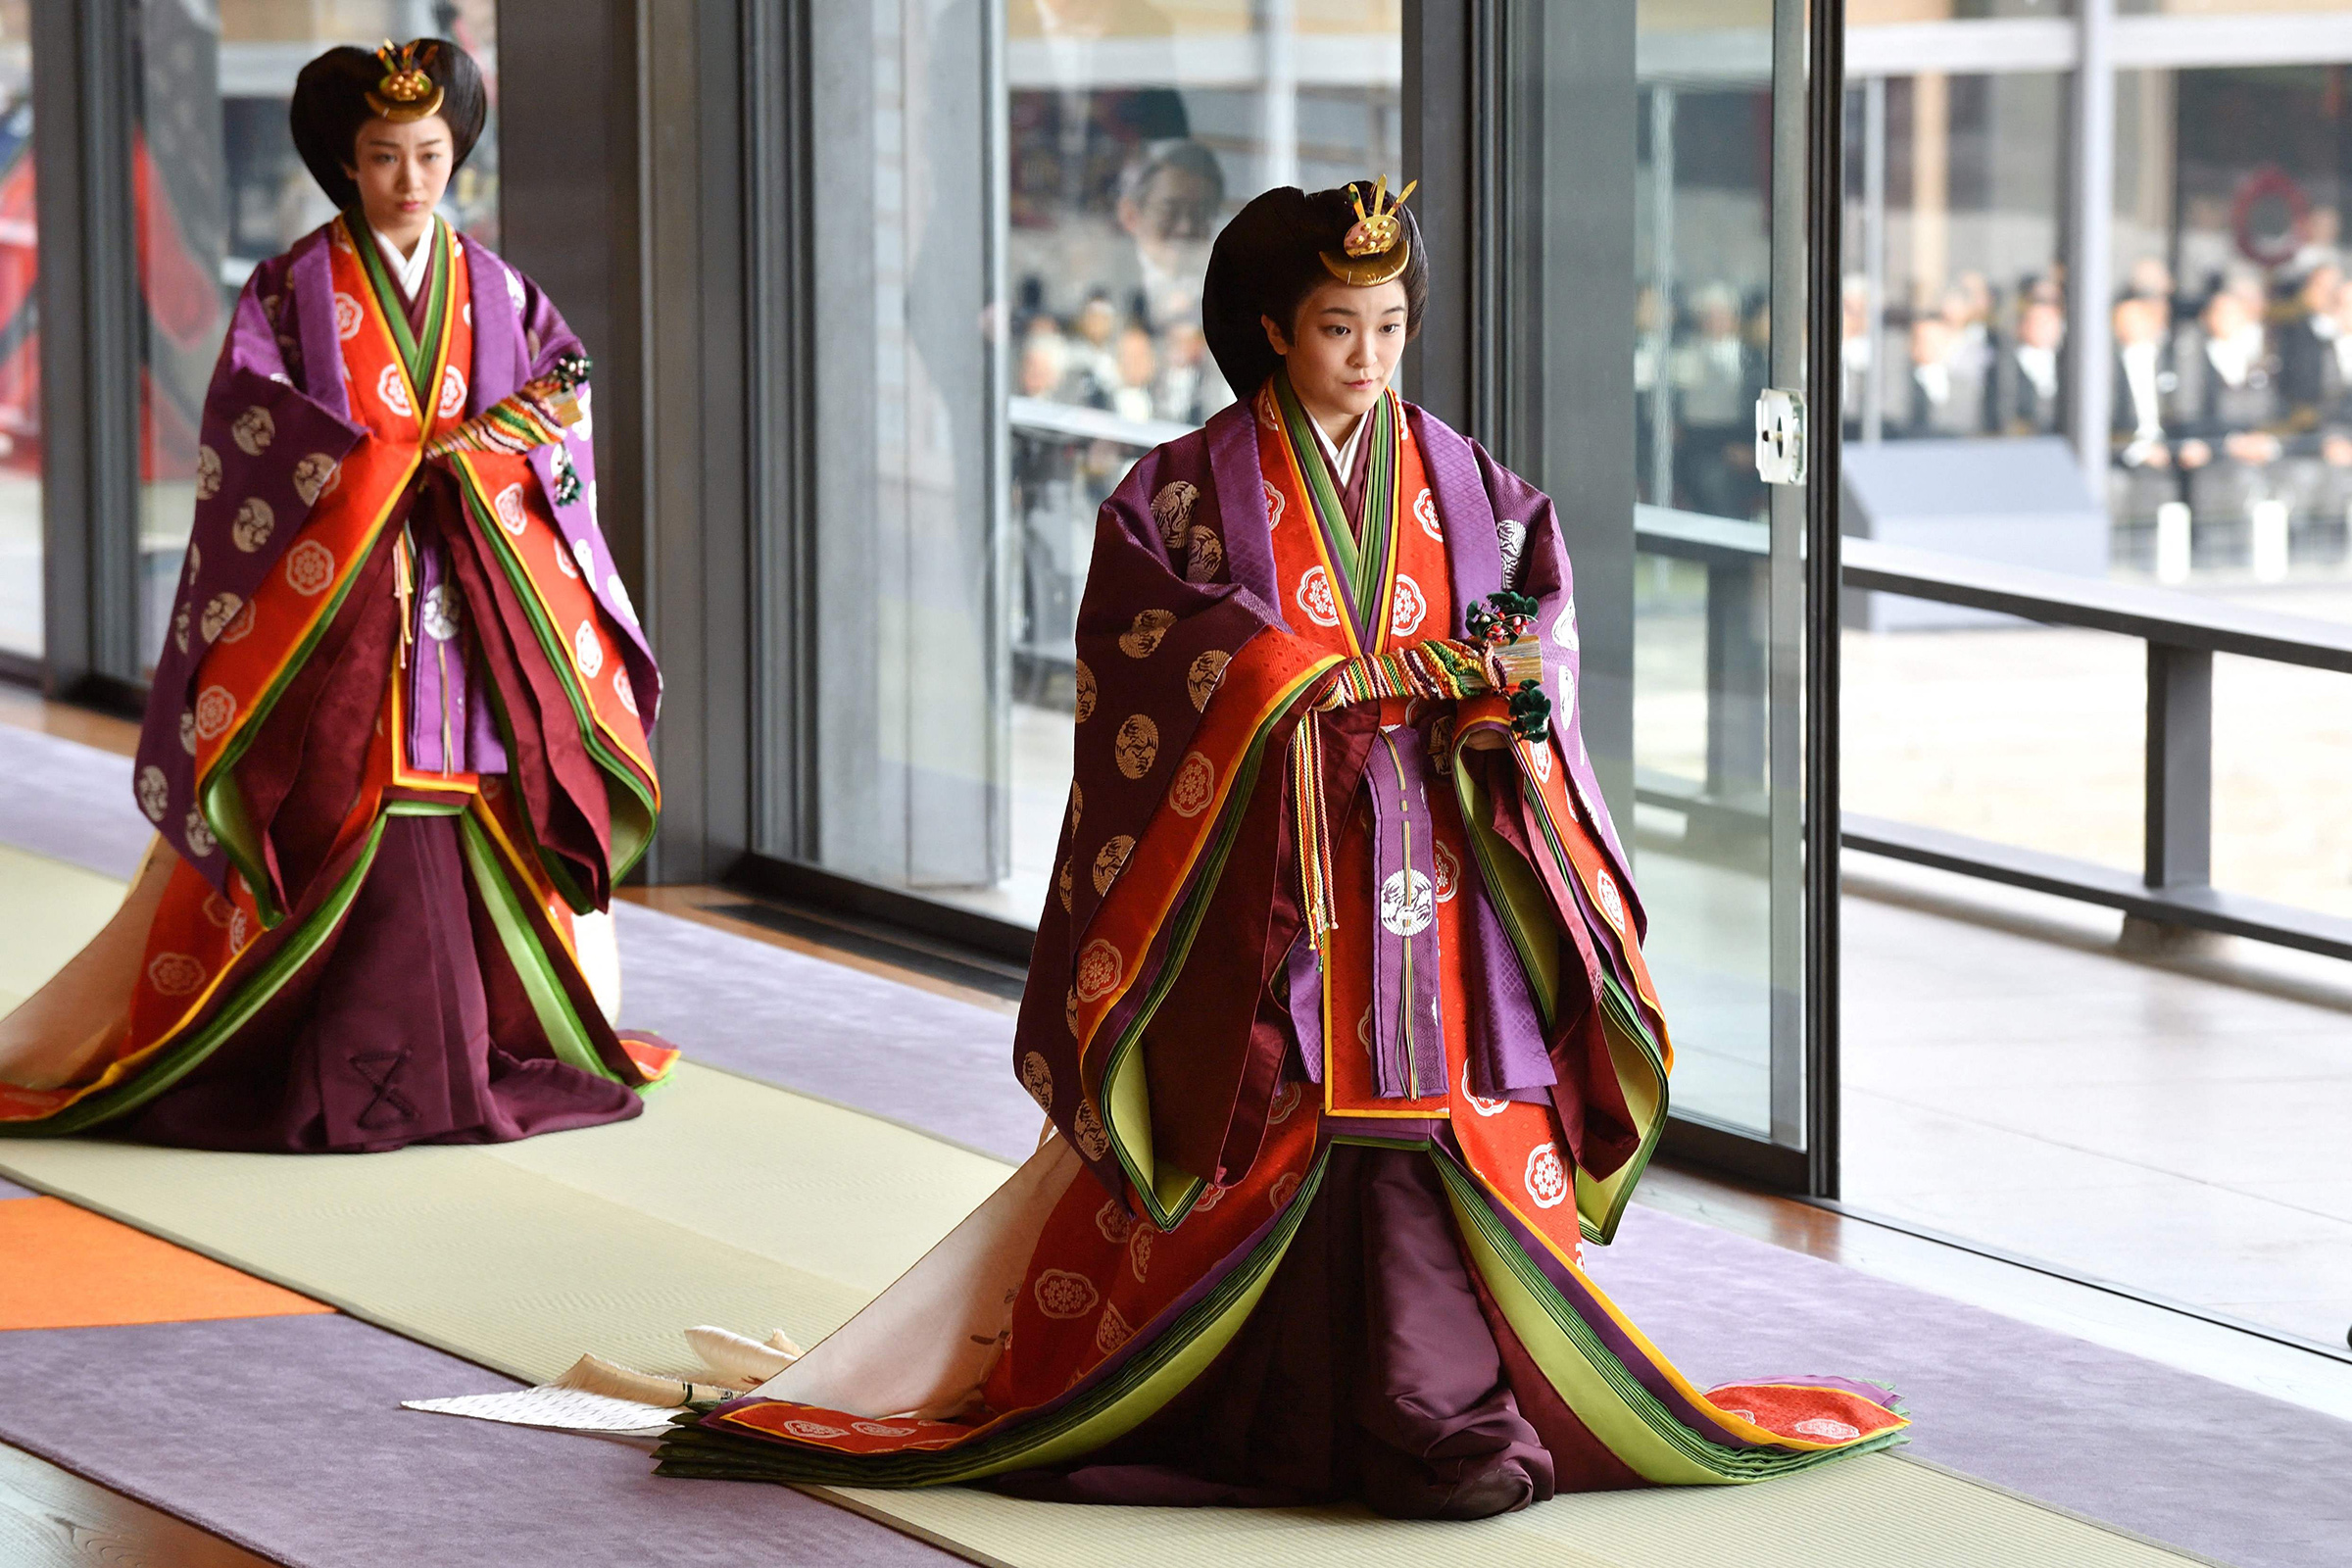 Princess Mako, right, attends the enthronement ceremony where Emperor Naruhito officially proclaimed his ascension to the Chrysanthemum Throne, at the Imperial Palace, Tokyo, in Oct. 2019.